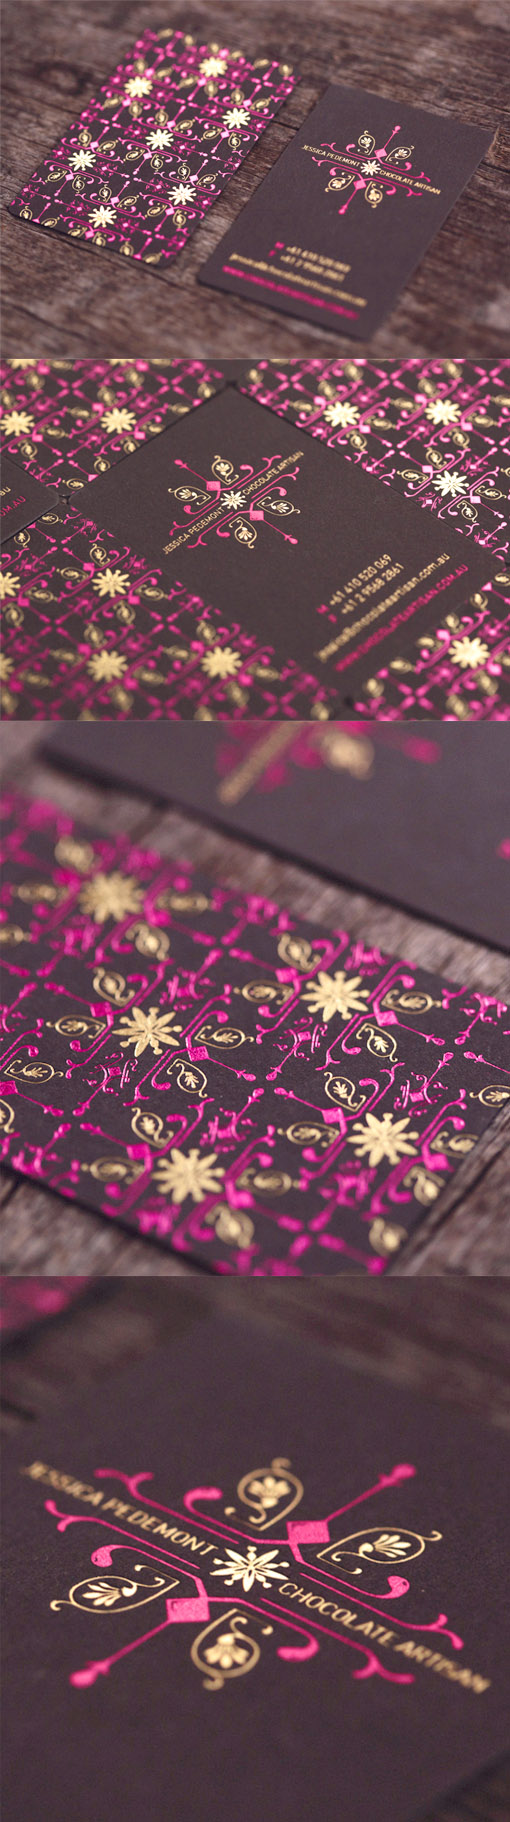 Beautiful Patterned Hot Foil Stamped Business Cards For A Chocolatier 